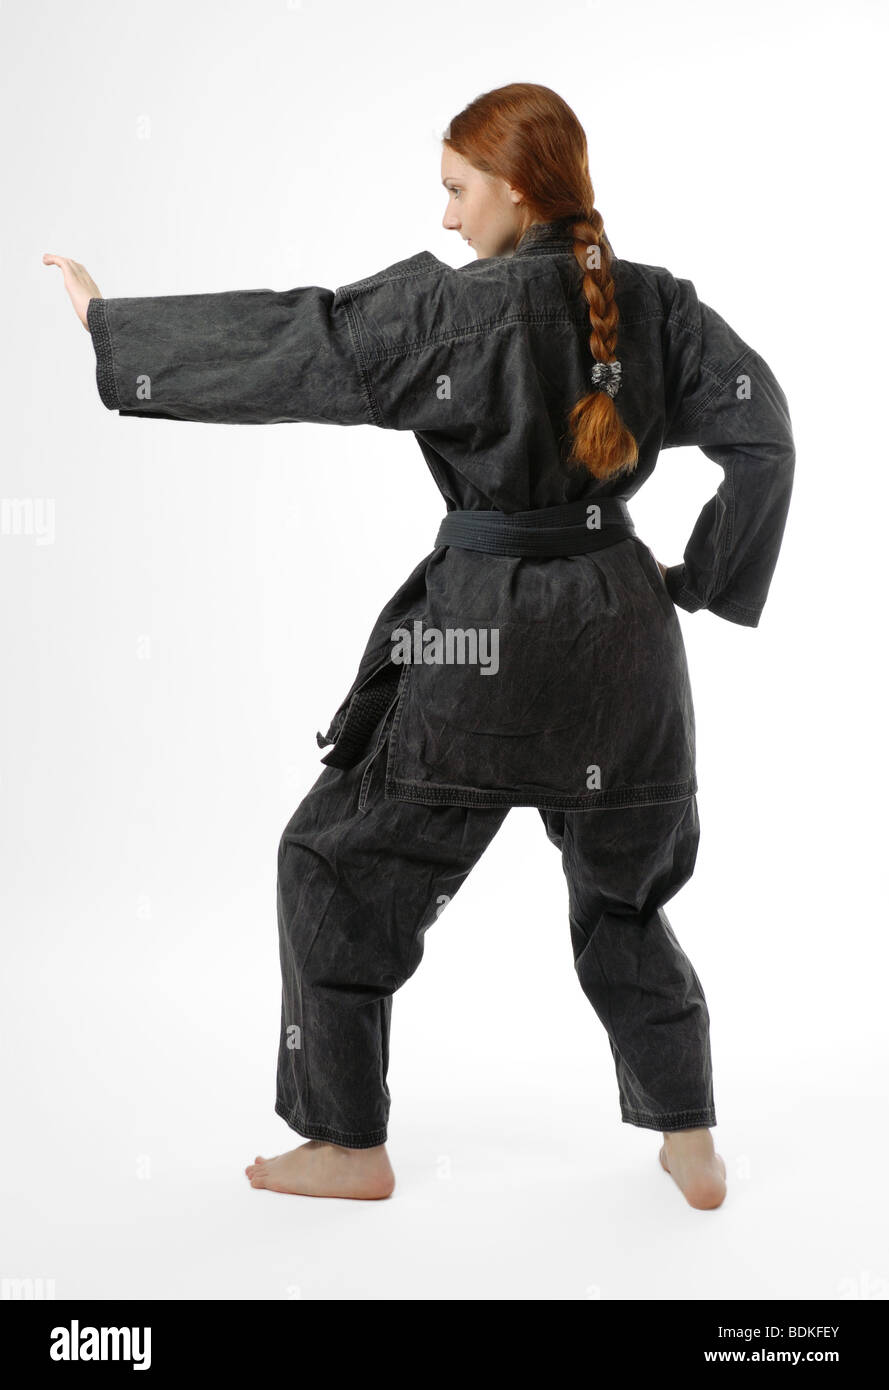 Girl in black uniform stands back on half-bent legs, left hand lifted for obstructing, isolated on white Stock Photo